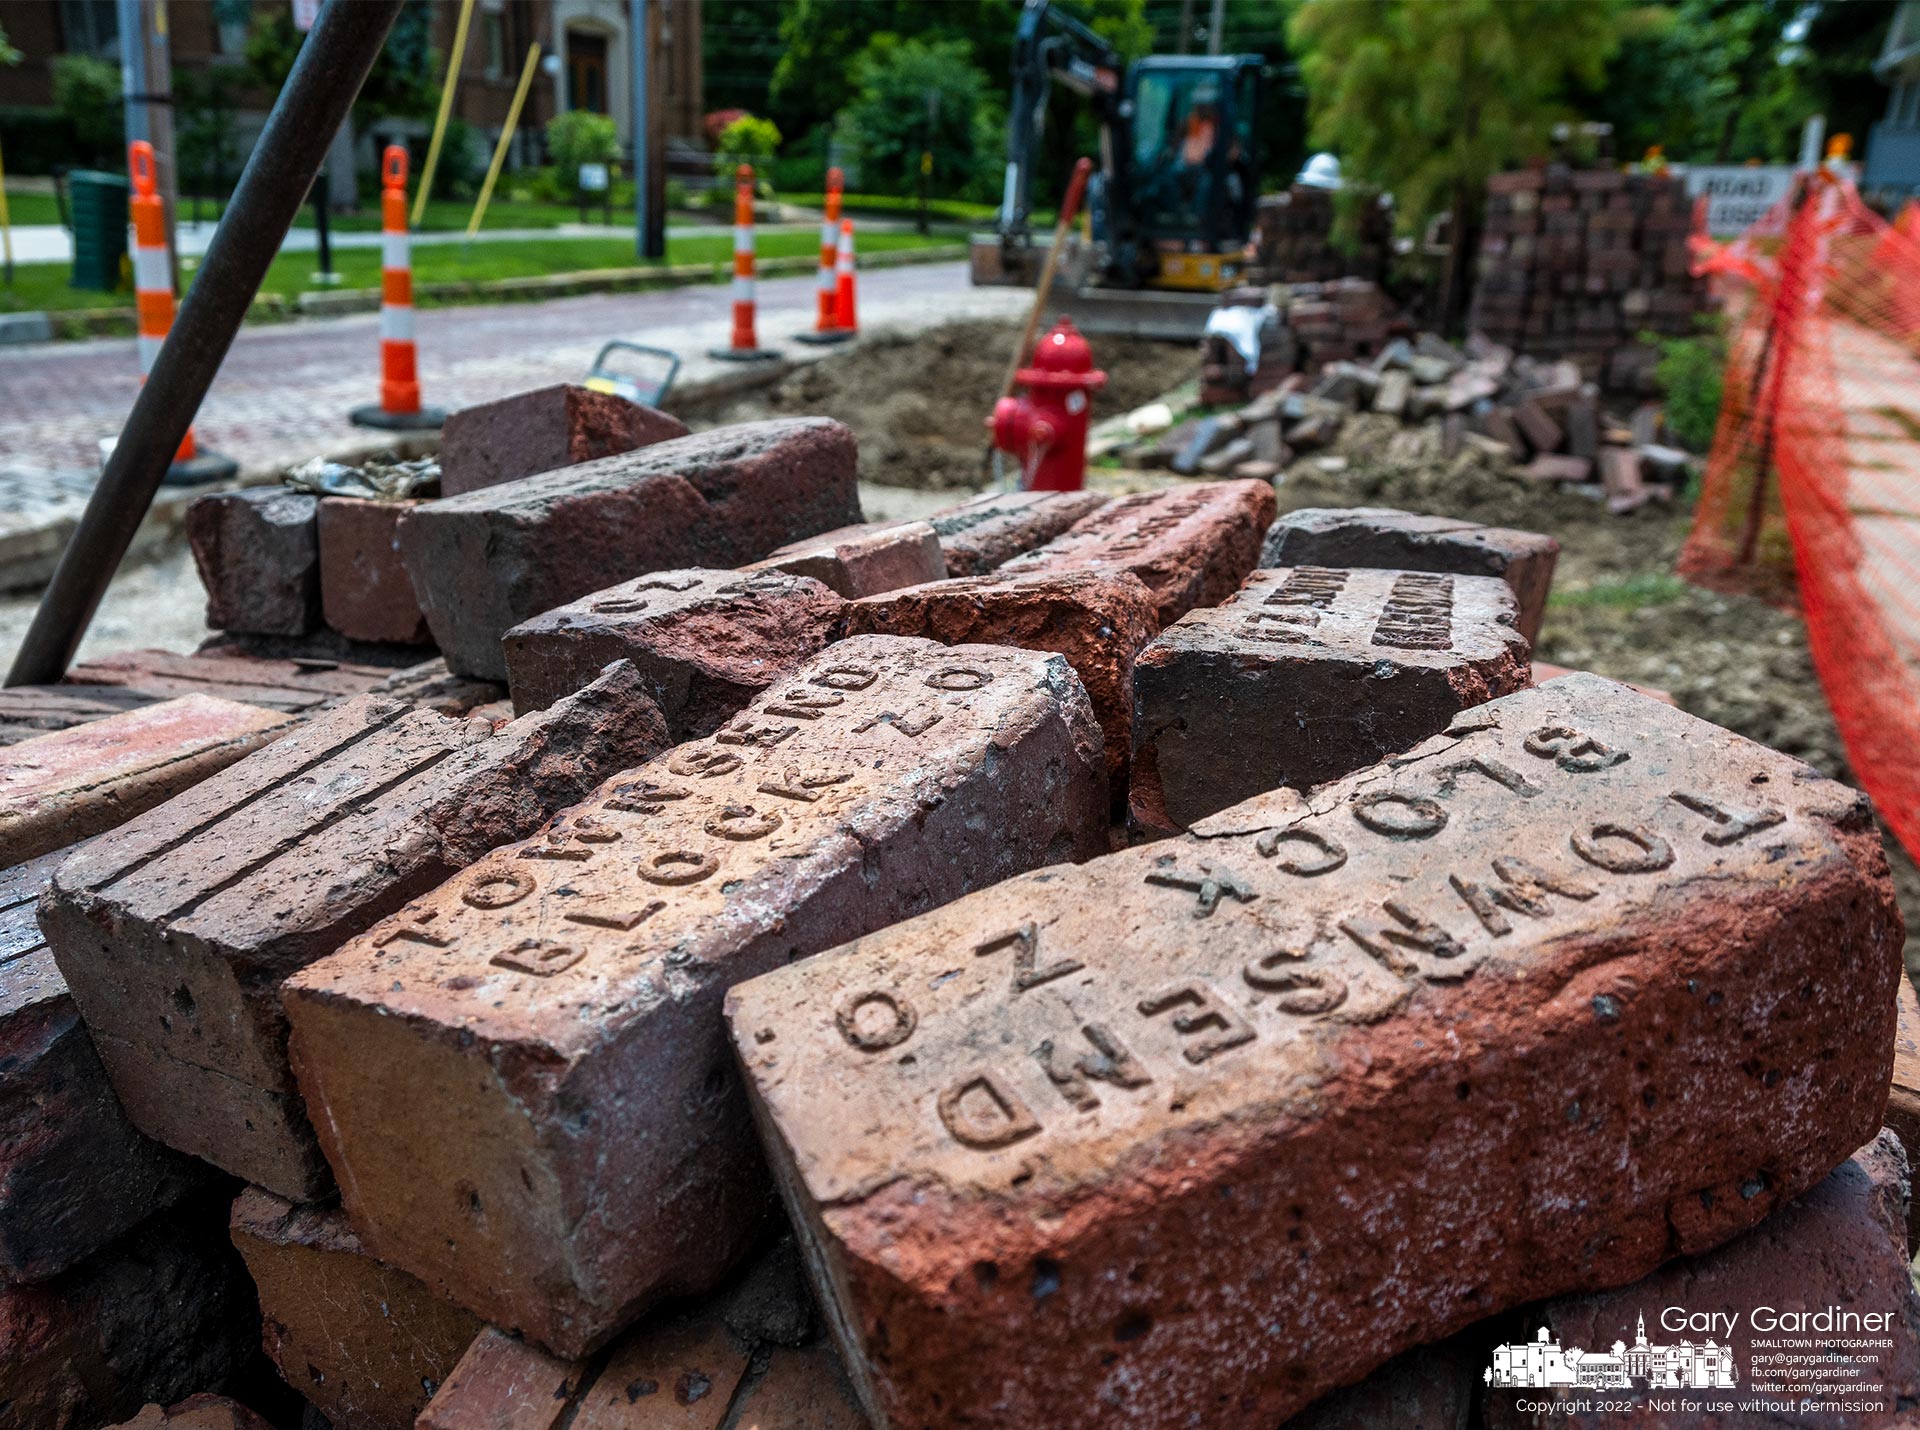 Brick pavers pulled from West College Street sit in piles waiting to be returned to the street following upgrades to the city water main. My Final Photo for July 21, 2022.